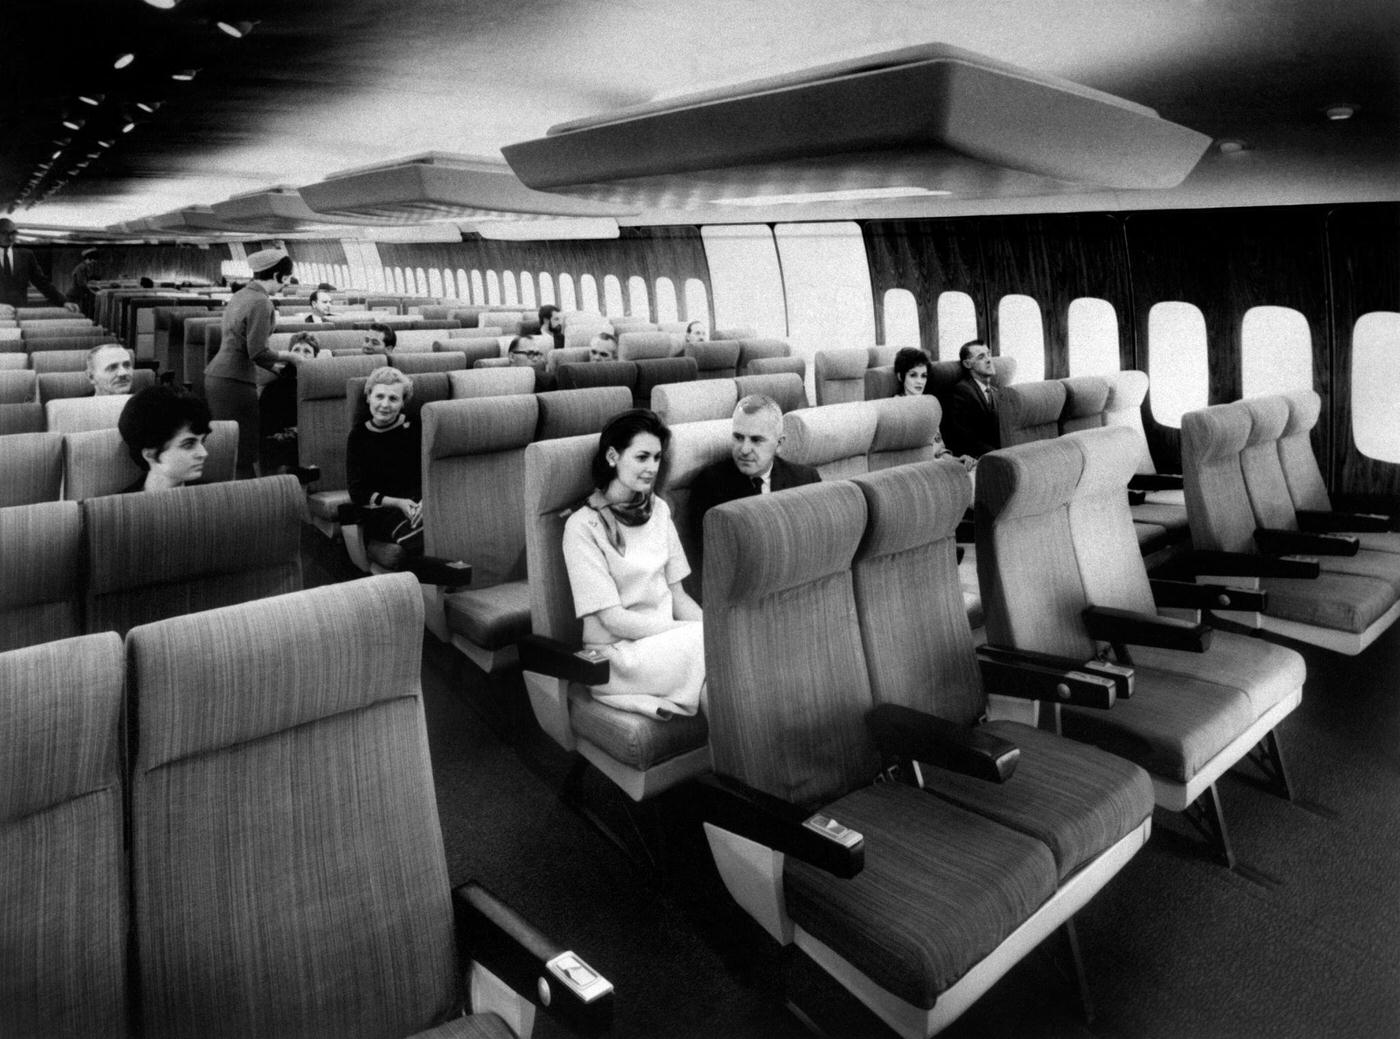 A model of an Air France Boeing 747 Jumbo Jet interior with passengers in 1966.